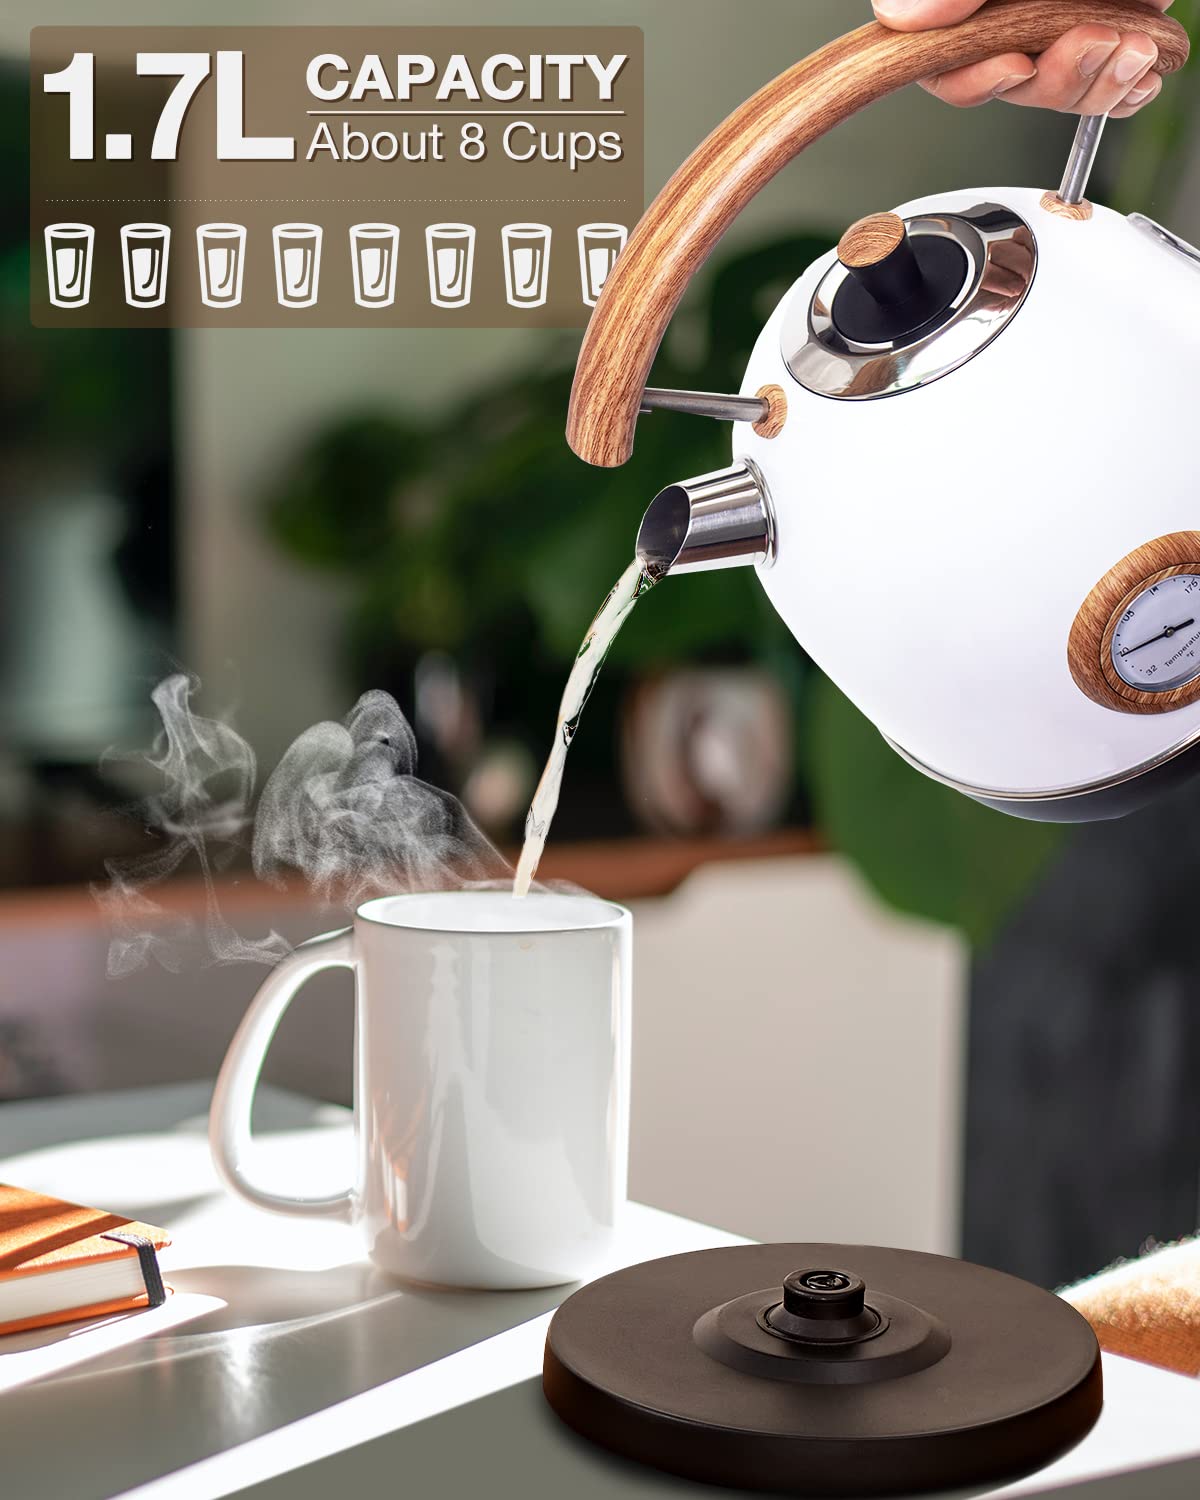 Electric Tea Kettle, Hot Water Boiler with Thermometer 1.7 Liter Stainless Steel Teapot, BPA Free, 1500W, SMOLON Wood Pattern Handle Pour-Over Electric Kettle with LED Indicator Auto Shut-Off, White